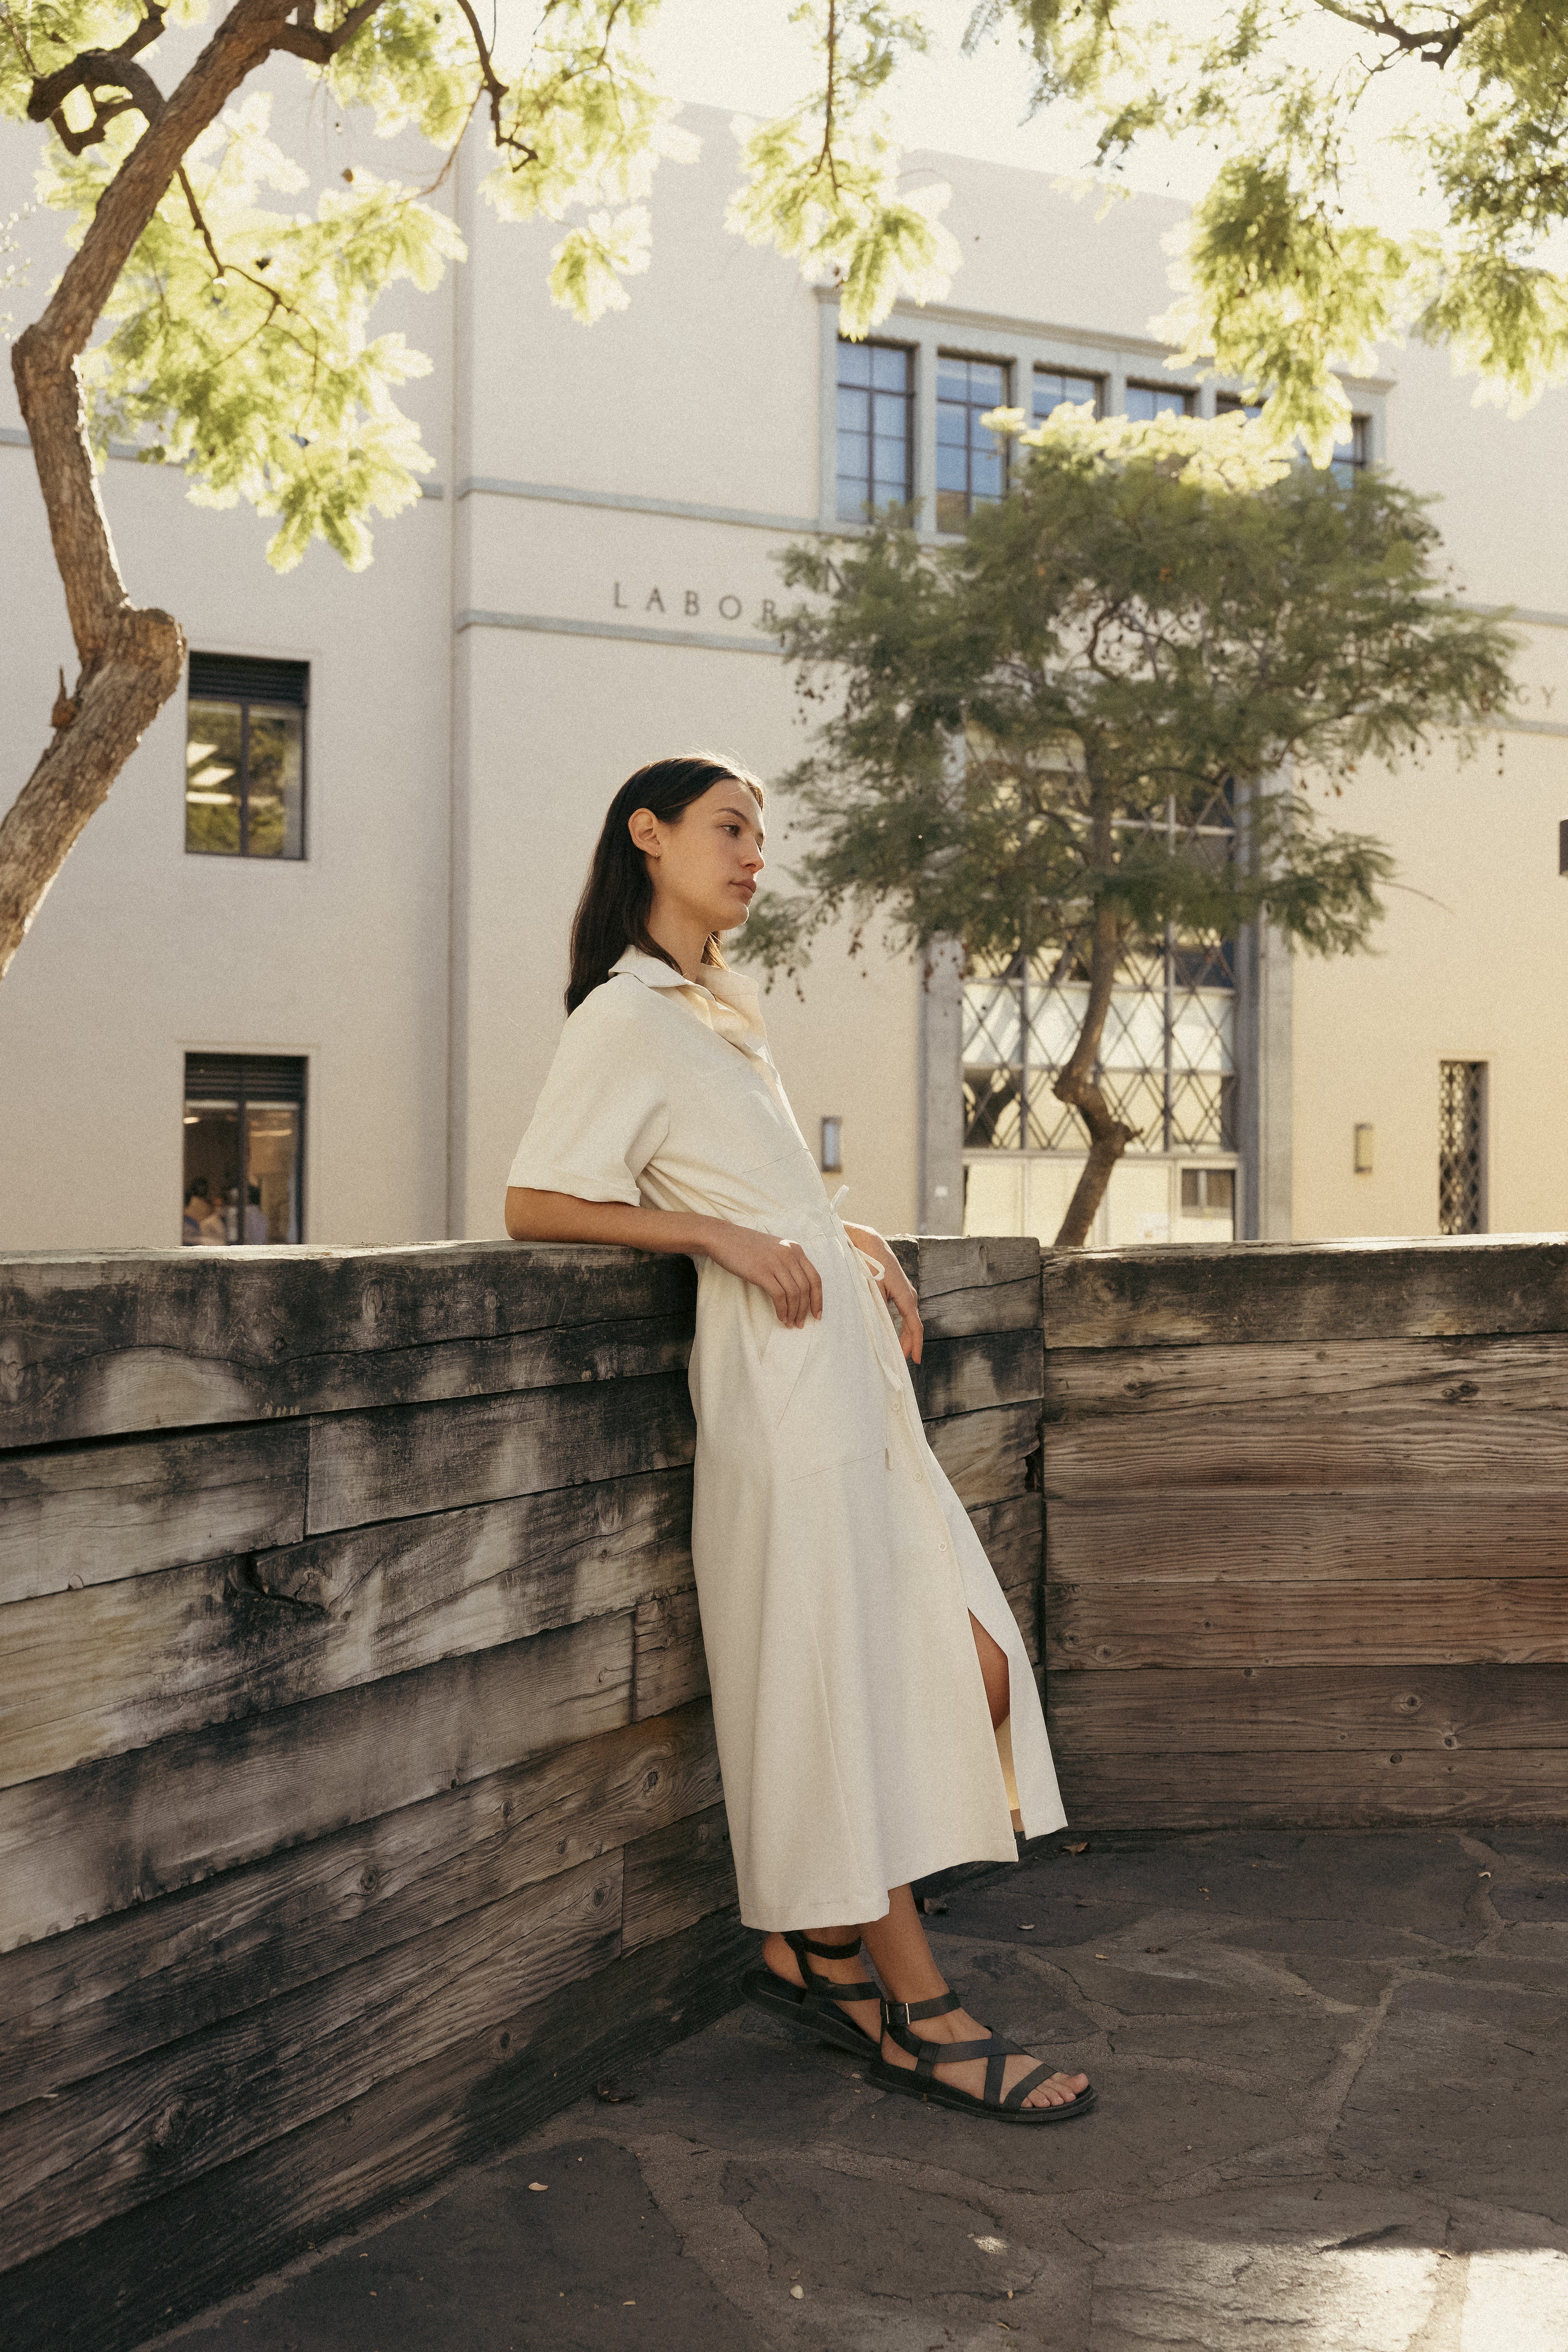 Belted Midi Shirt Dress in Ivory